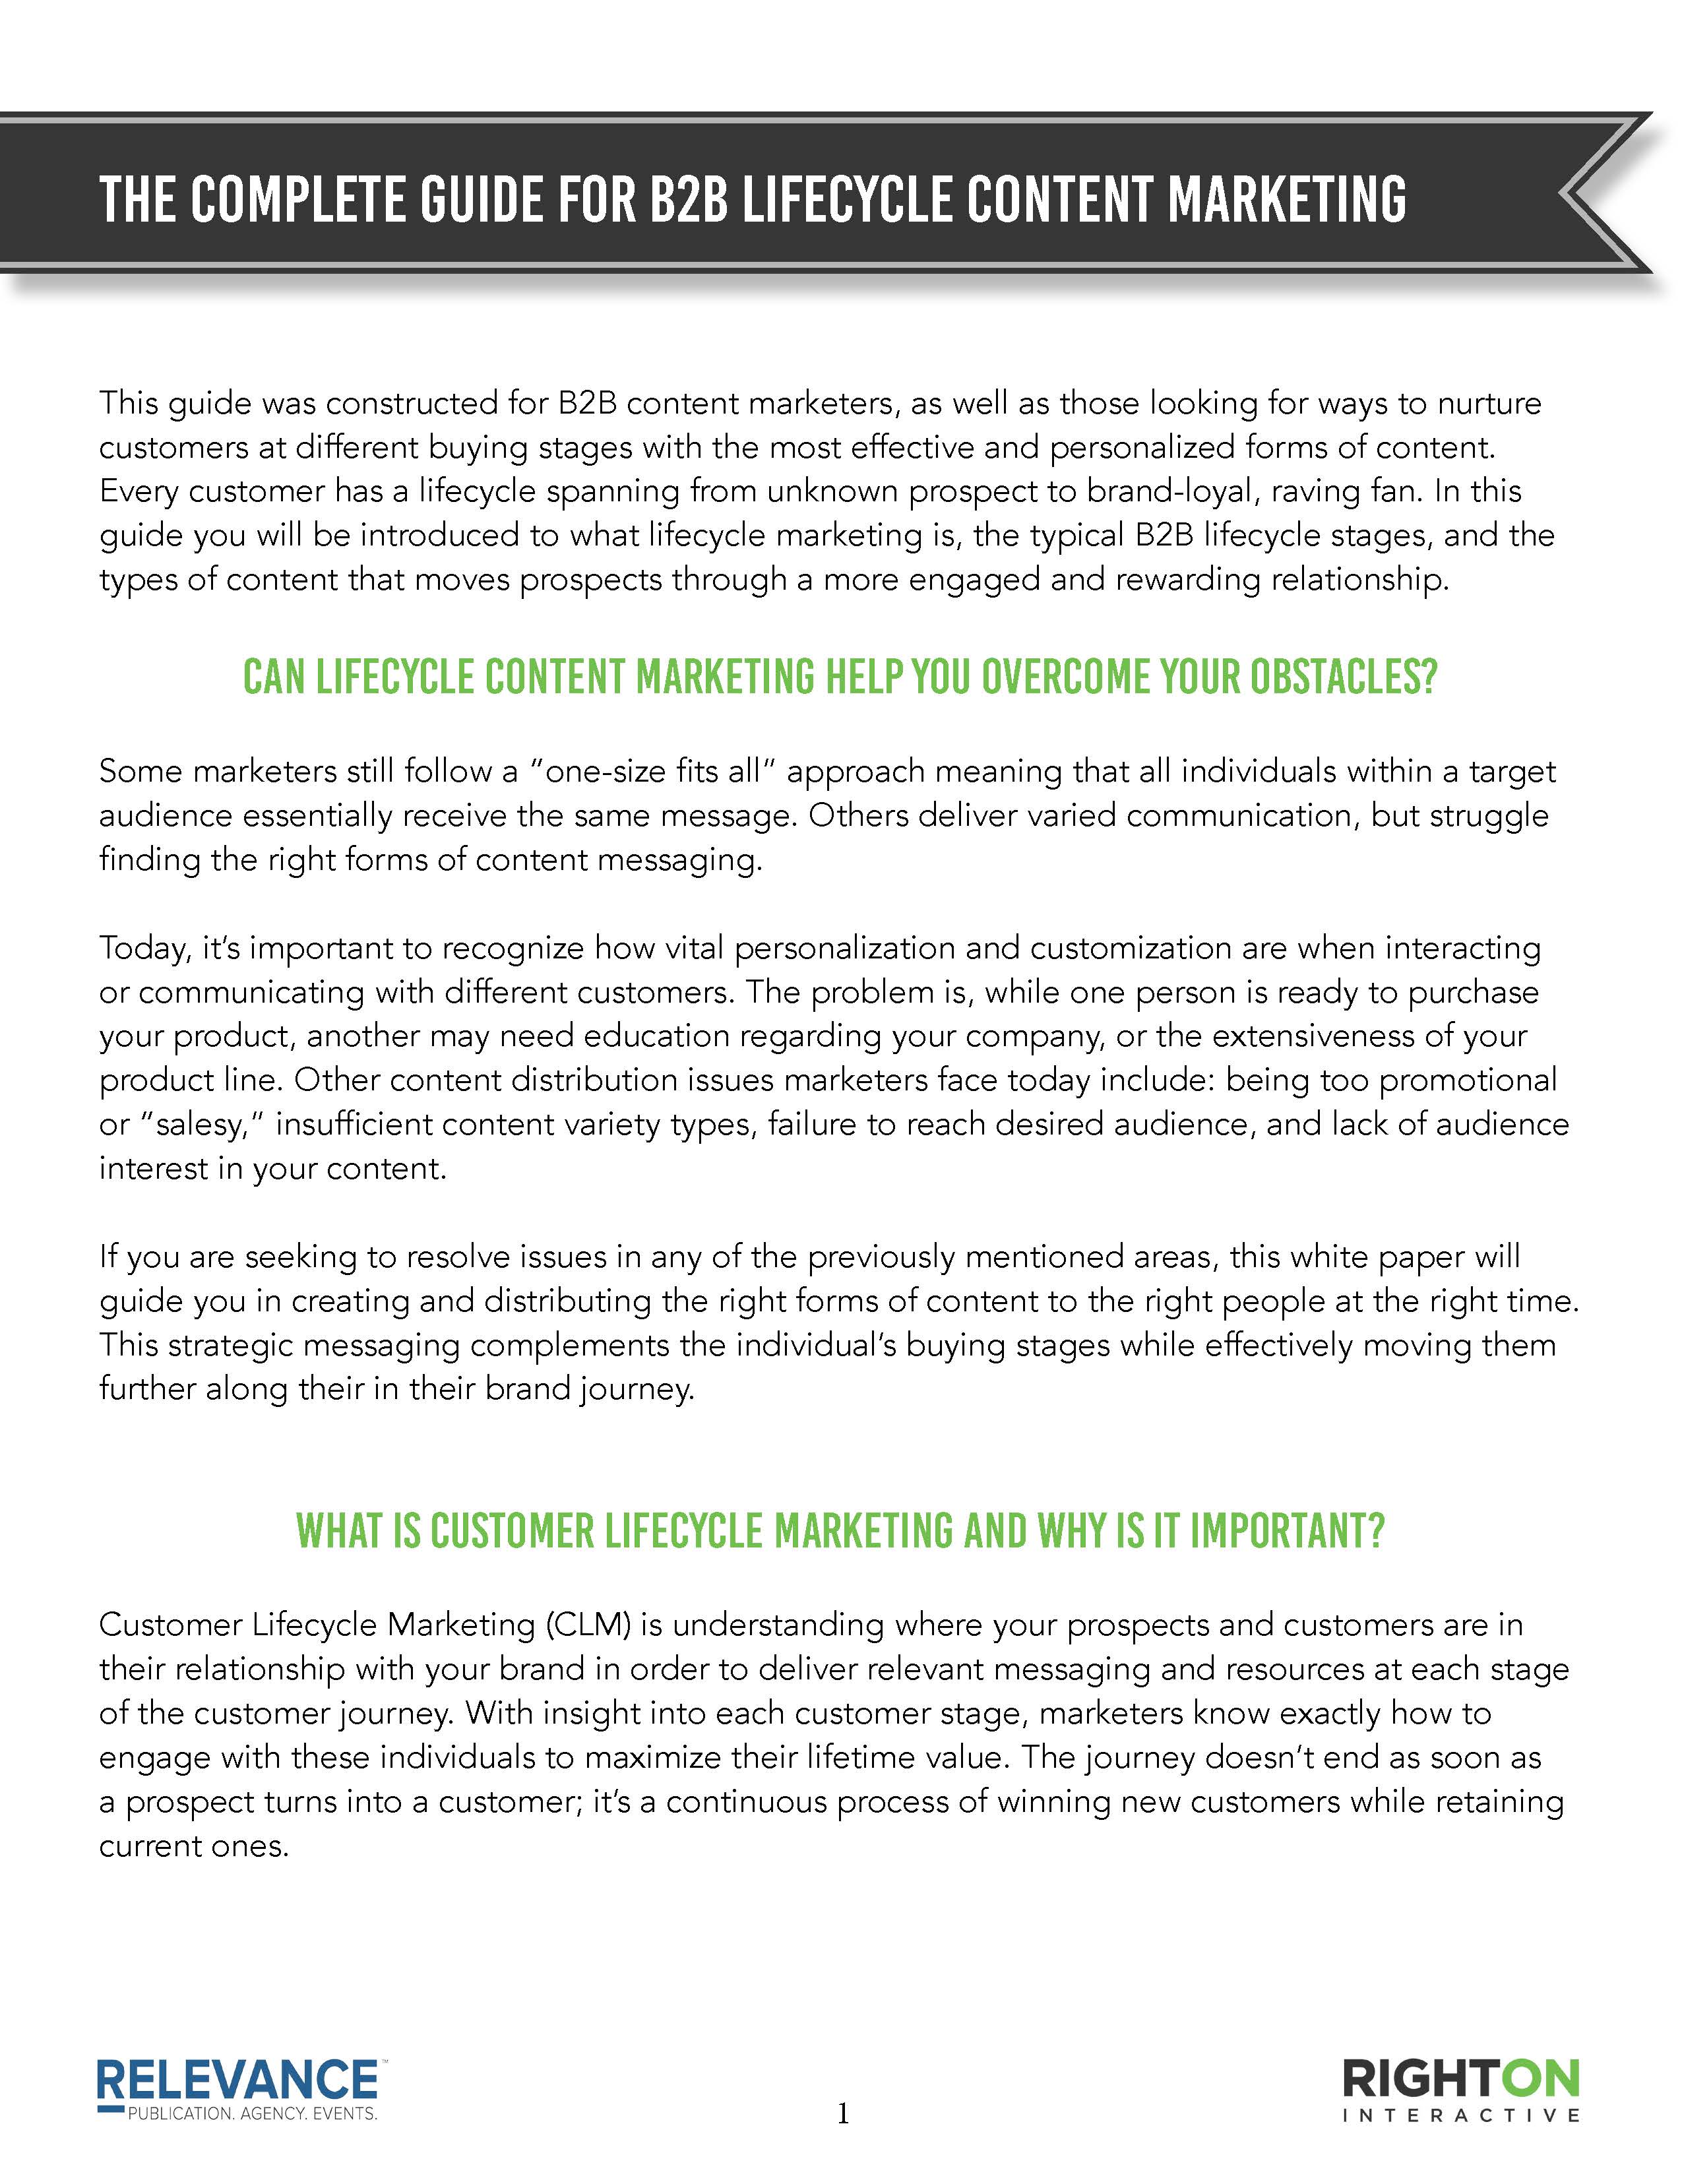 The Complete Guide for B2B Lifecycle Content Marketing Whitepaper_Page_02